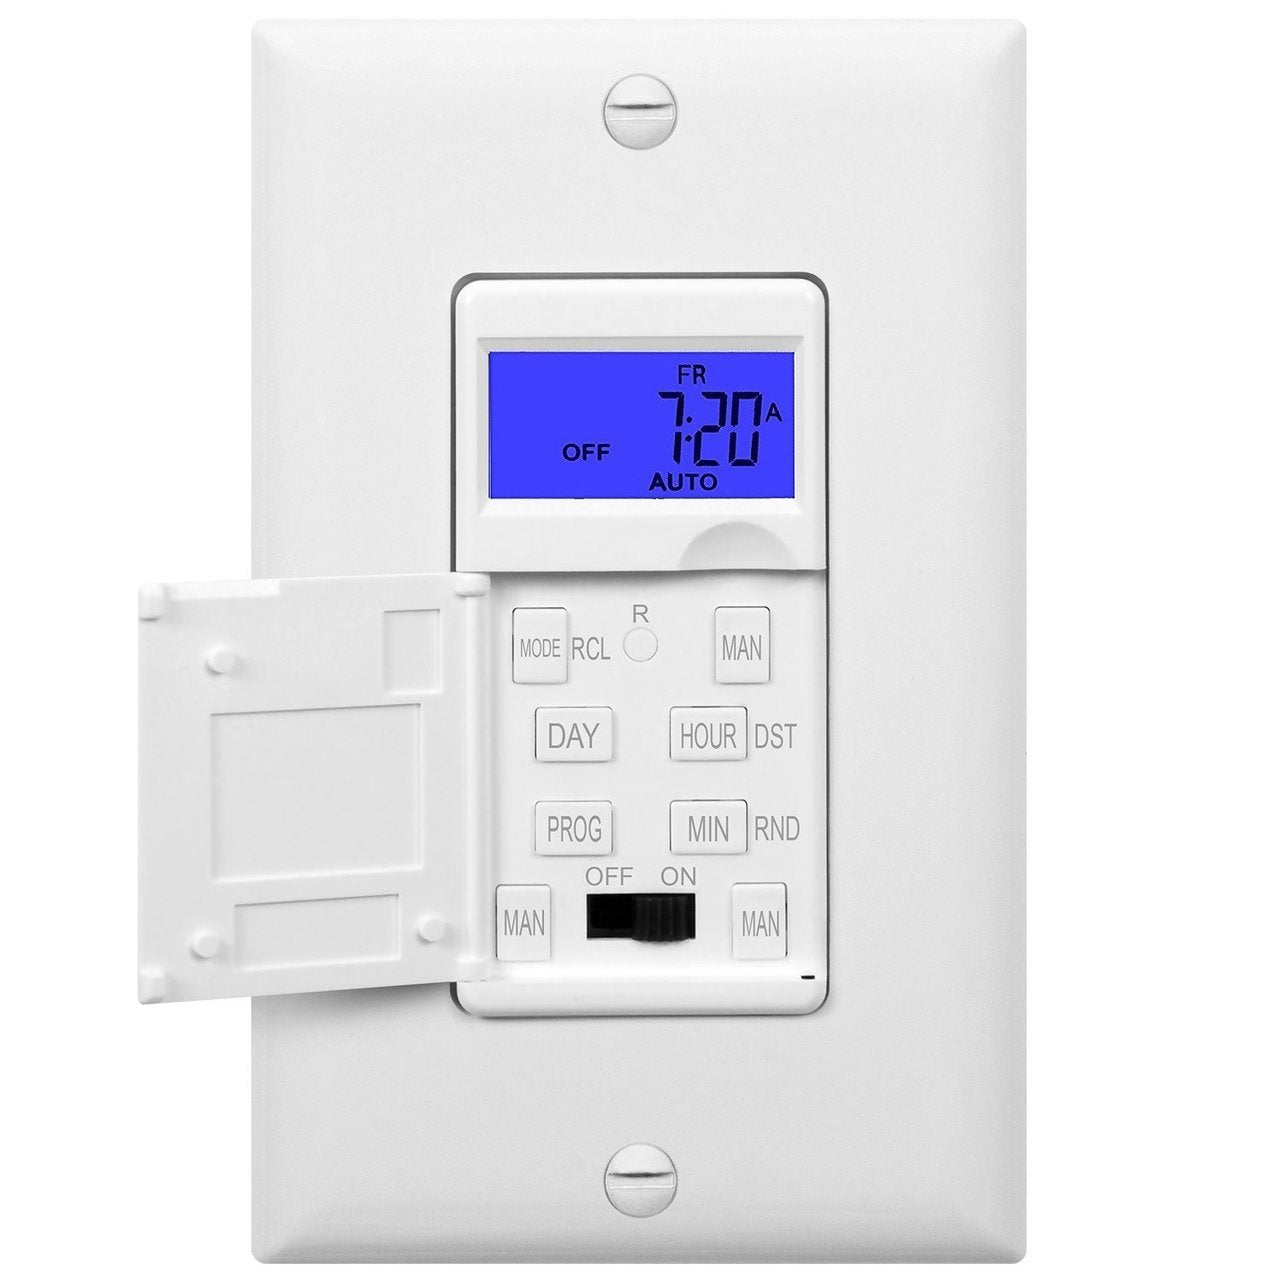 7 Days Digital in-Wall Programmable Timer Switch for Lights, Fans, and Motors, Single Pole, Neutral Wire Required, 7-Day 18 ON/Off Timer Settings, with Blue Backlight, White Four Bros Lighting